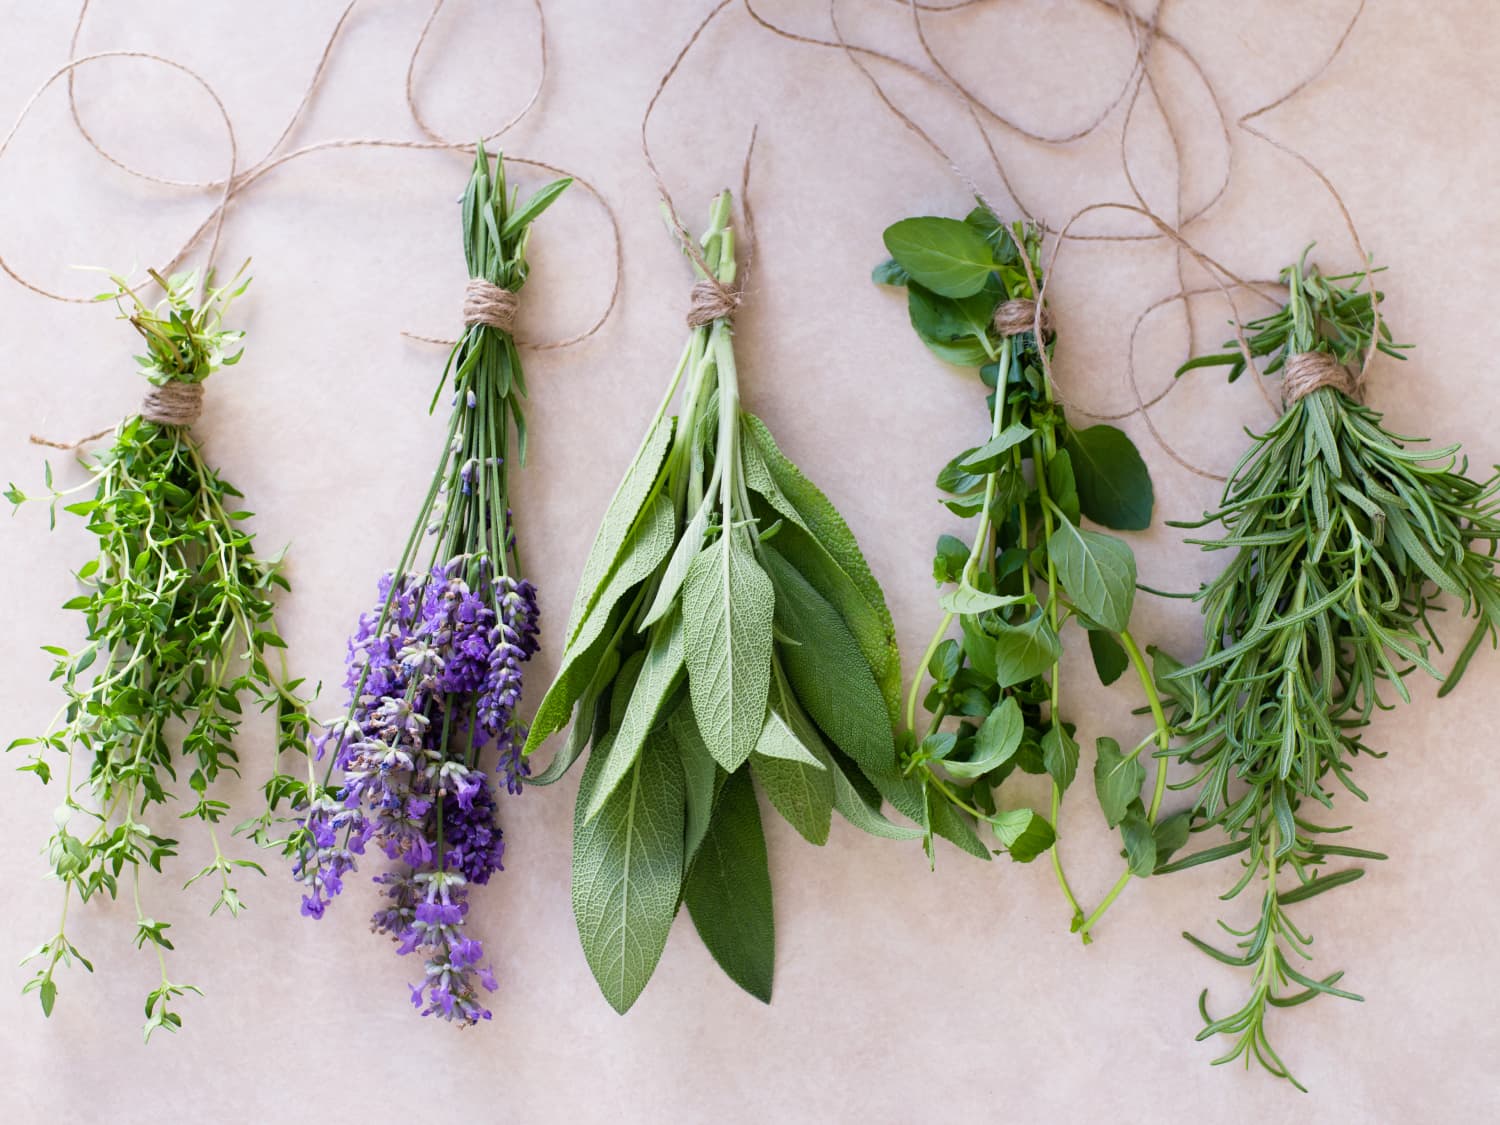 Cleaning And Preparing Herbs